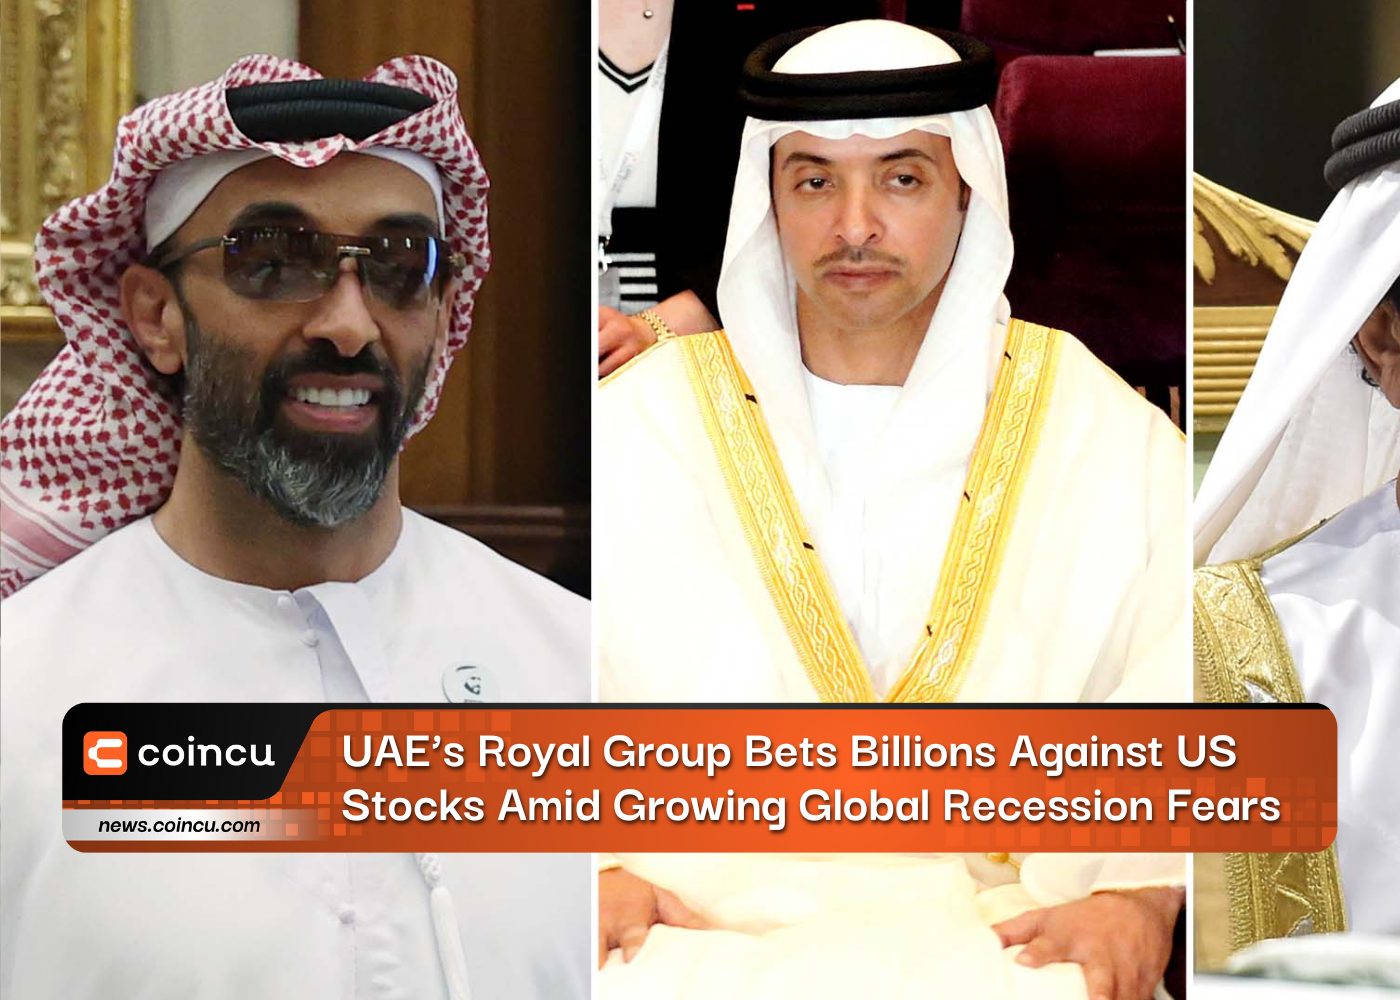 UAE’s Royal Group Bets Billions Against US Stocks Amid Growing Global Recession Fears